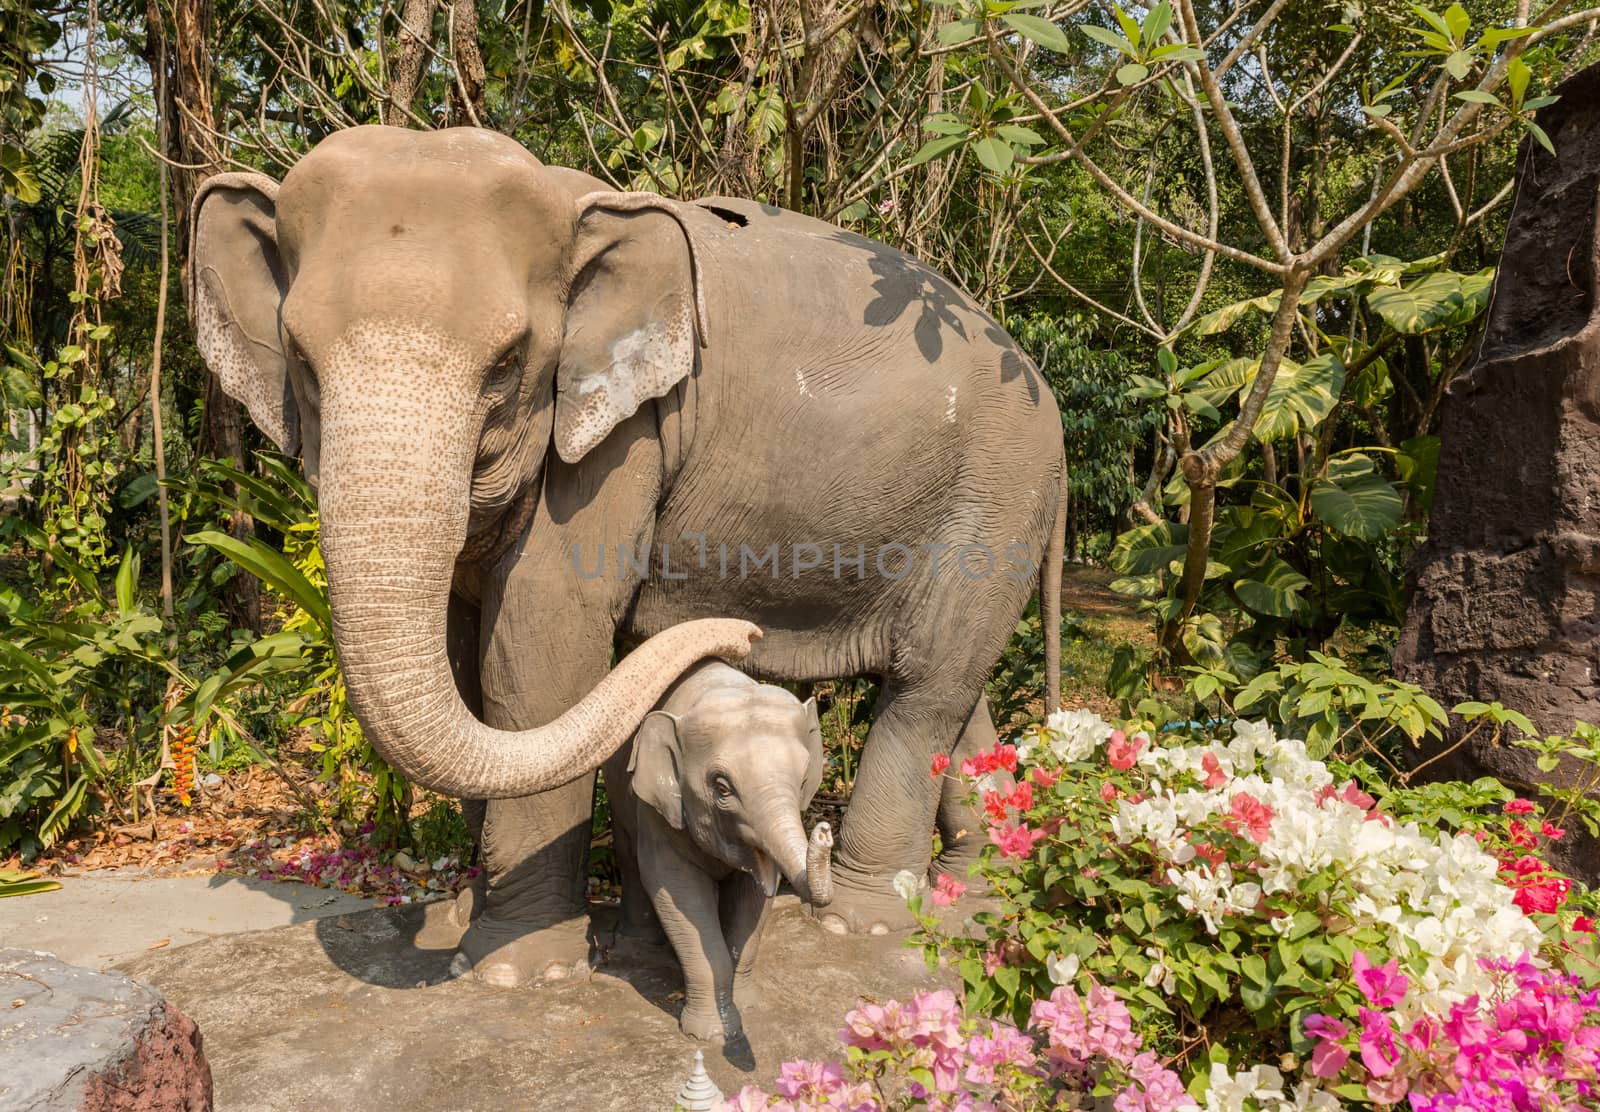 Elephant and baby elephant sculpture in the park